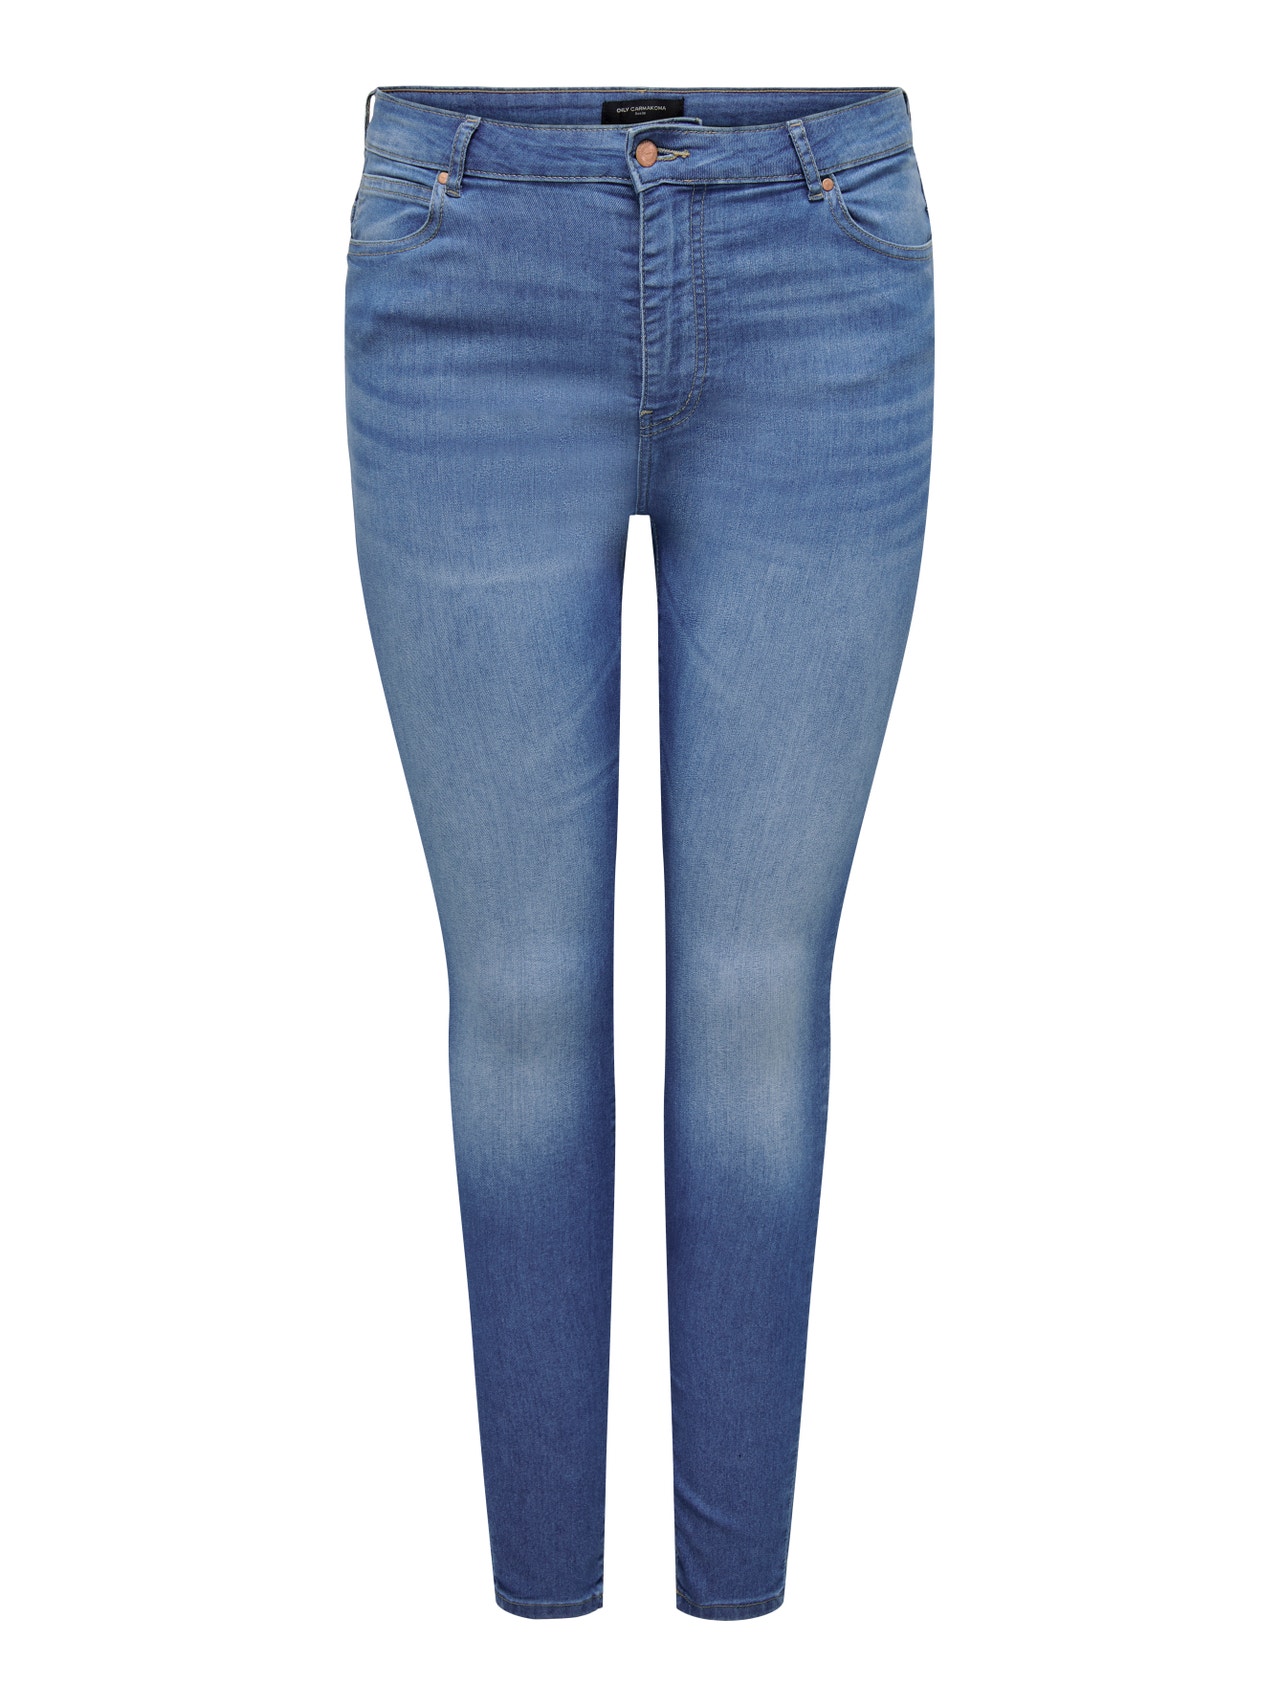 ONLY Jeans Skinny Fit Taille haute -Medium Blue Denim - 15276298